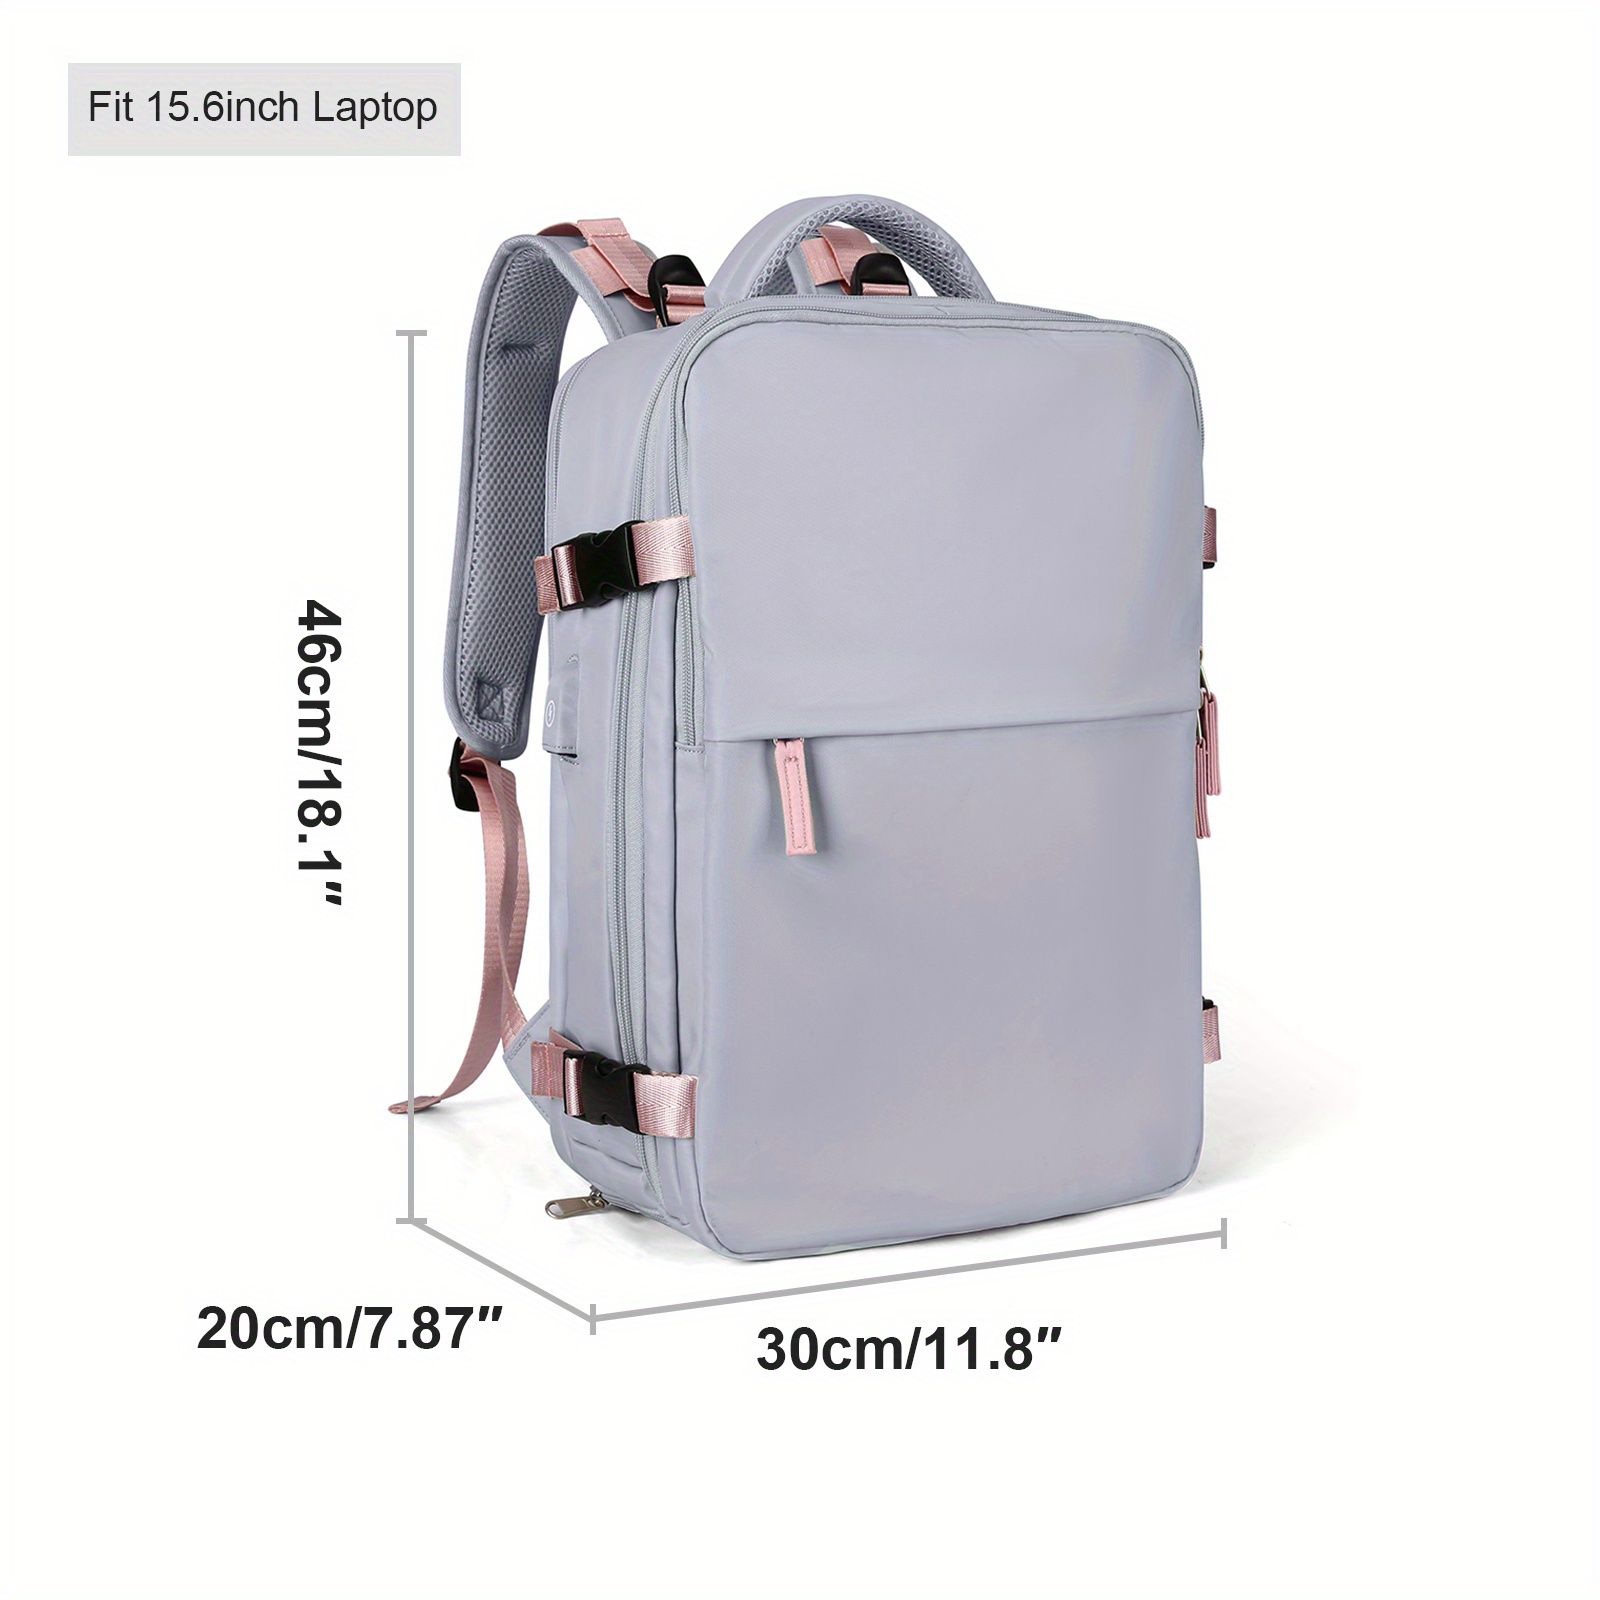 Large Travel Backpack Women, Hiking Backpack Waterproof Outdoor Sports  Rucksack School Bag Fit 15.6 Inch Laptop With Usb Charging Port Shoes  Compartme